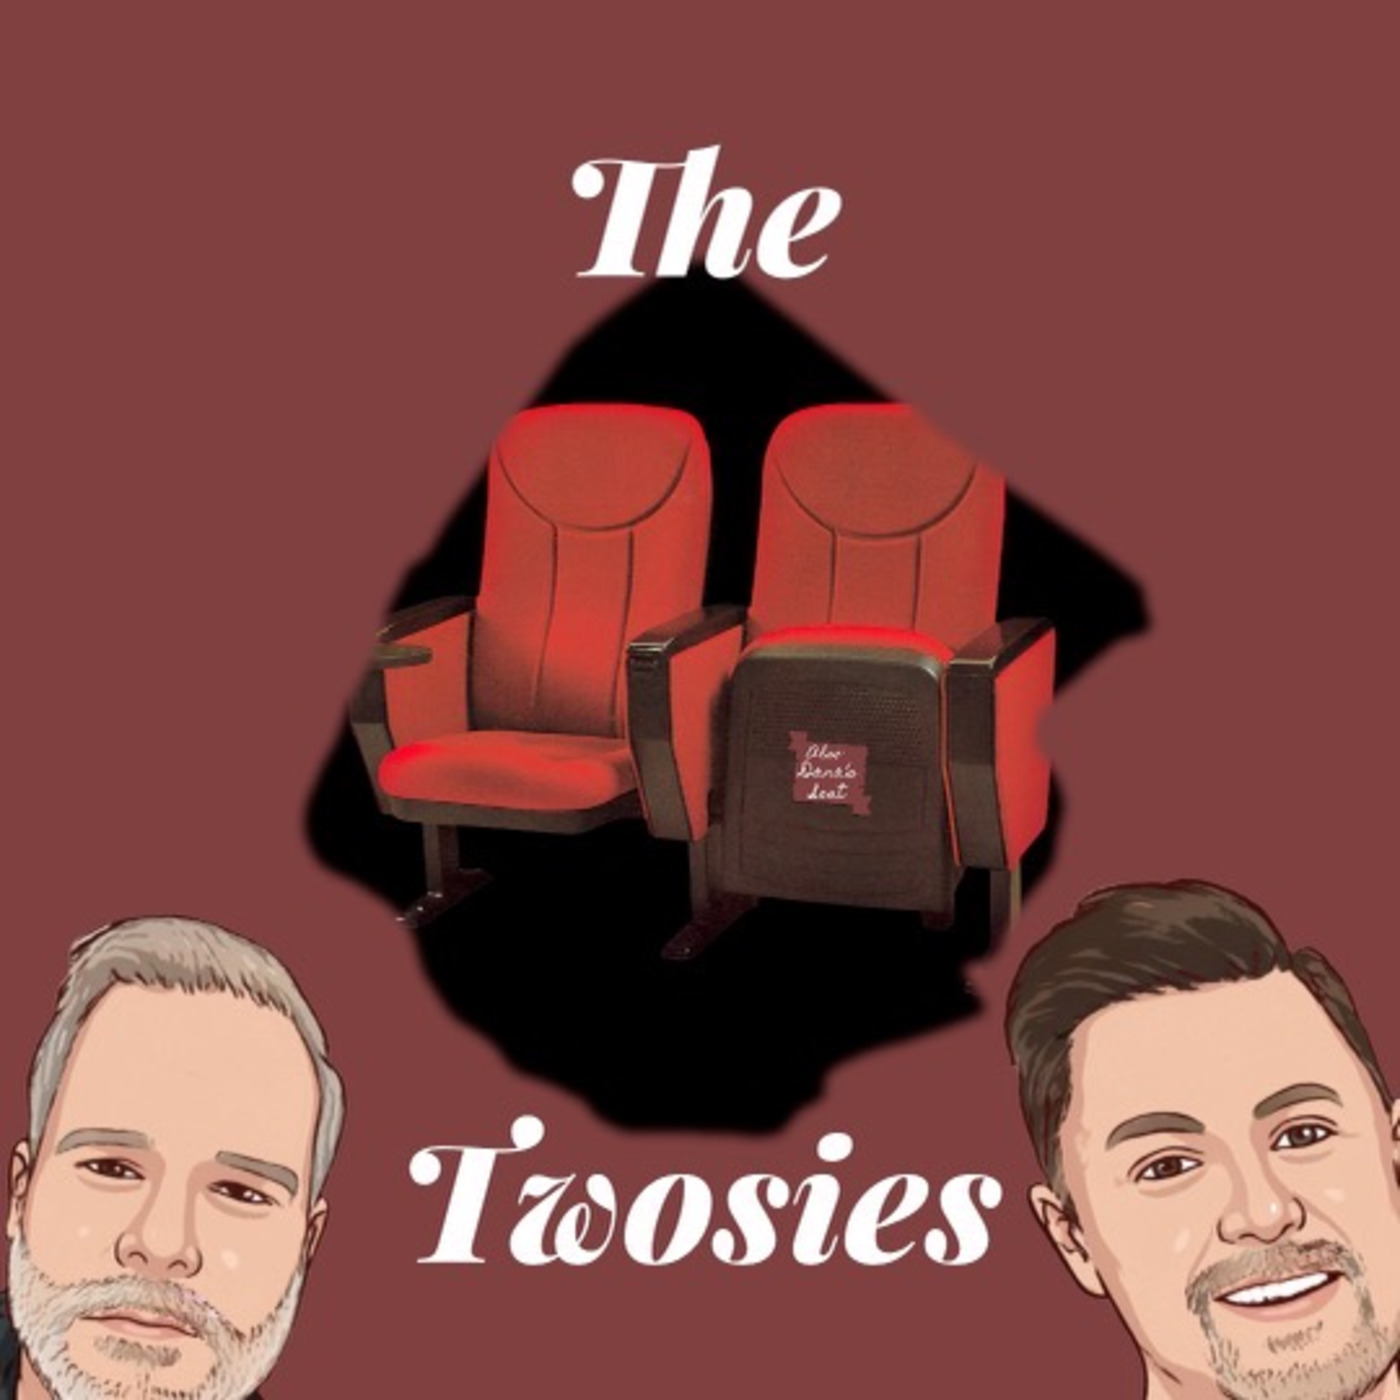 Episode 249: The Twosies Ep 2 : RoadHouse (Patreon Preview Episode)